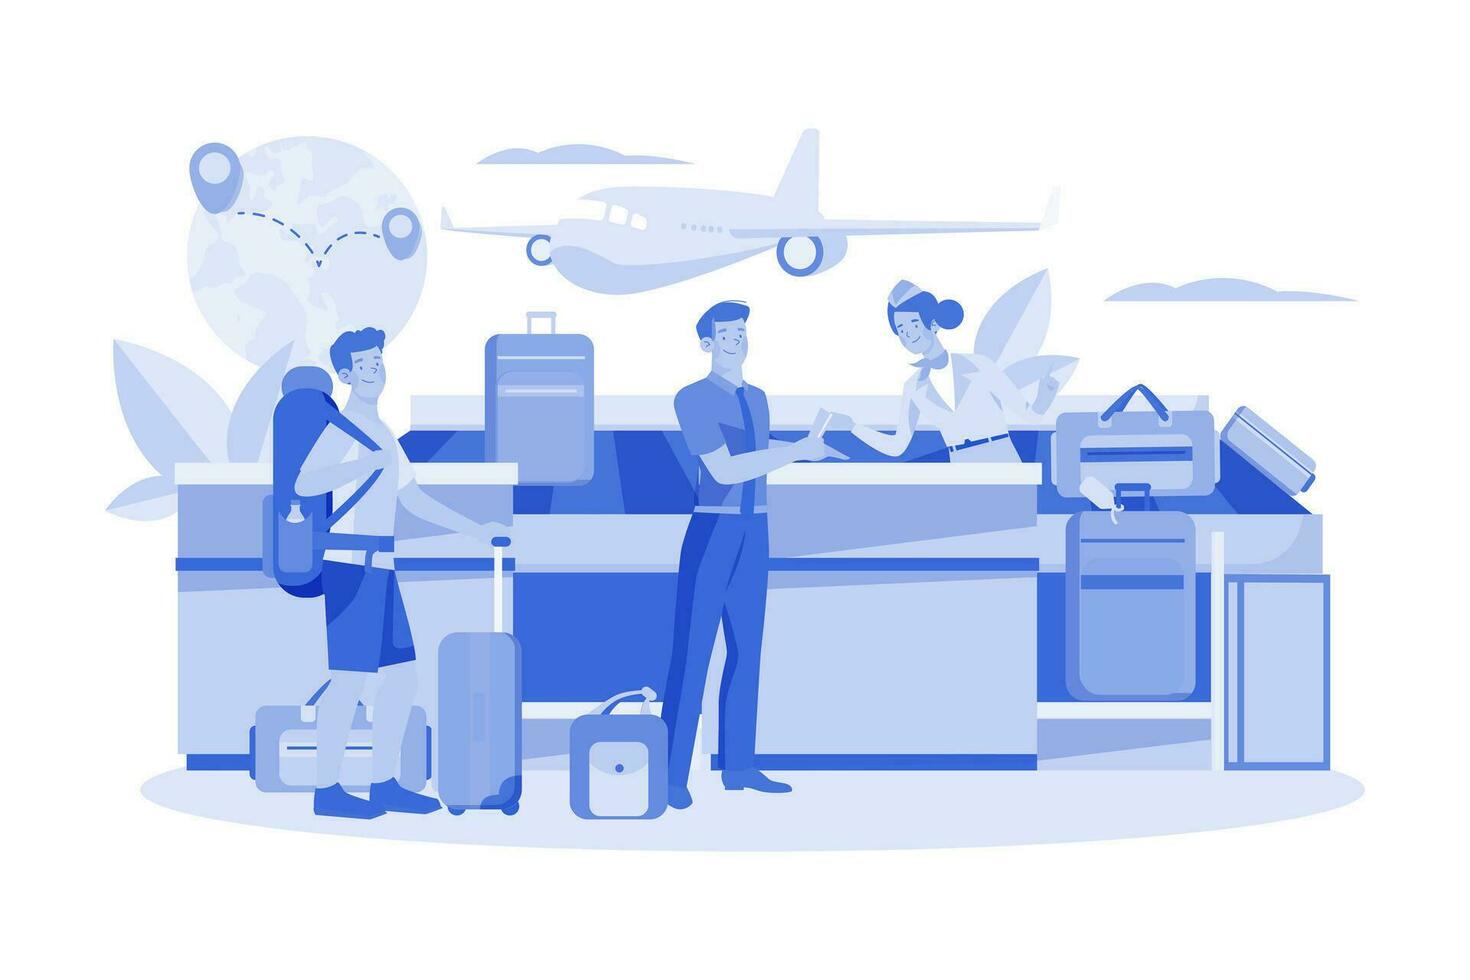 The flight attendant guides the passenger to check in at the counter vector